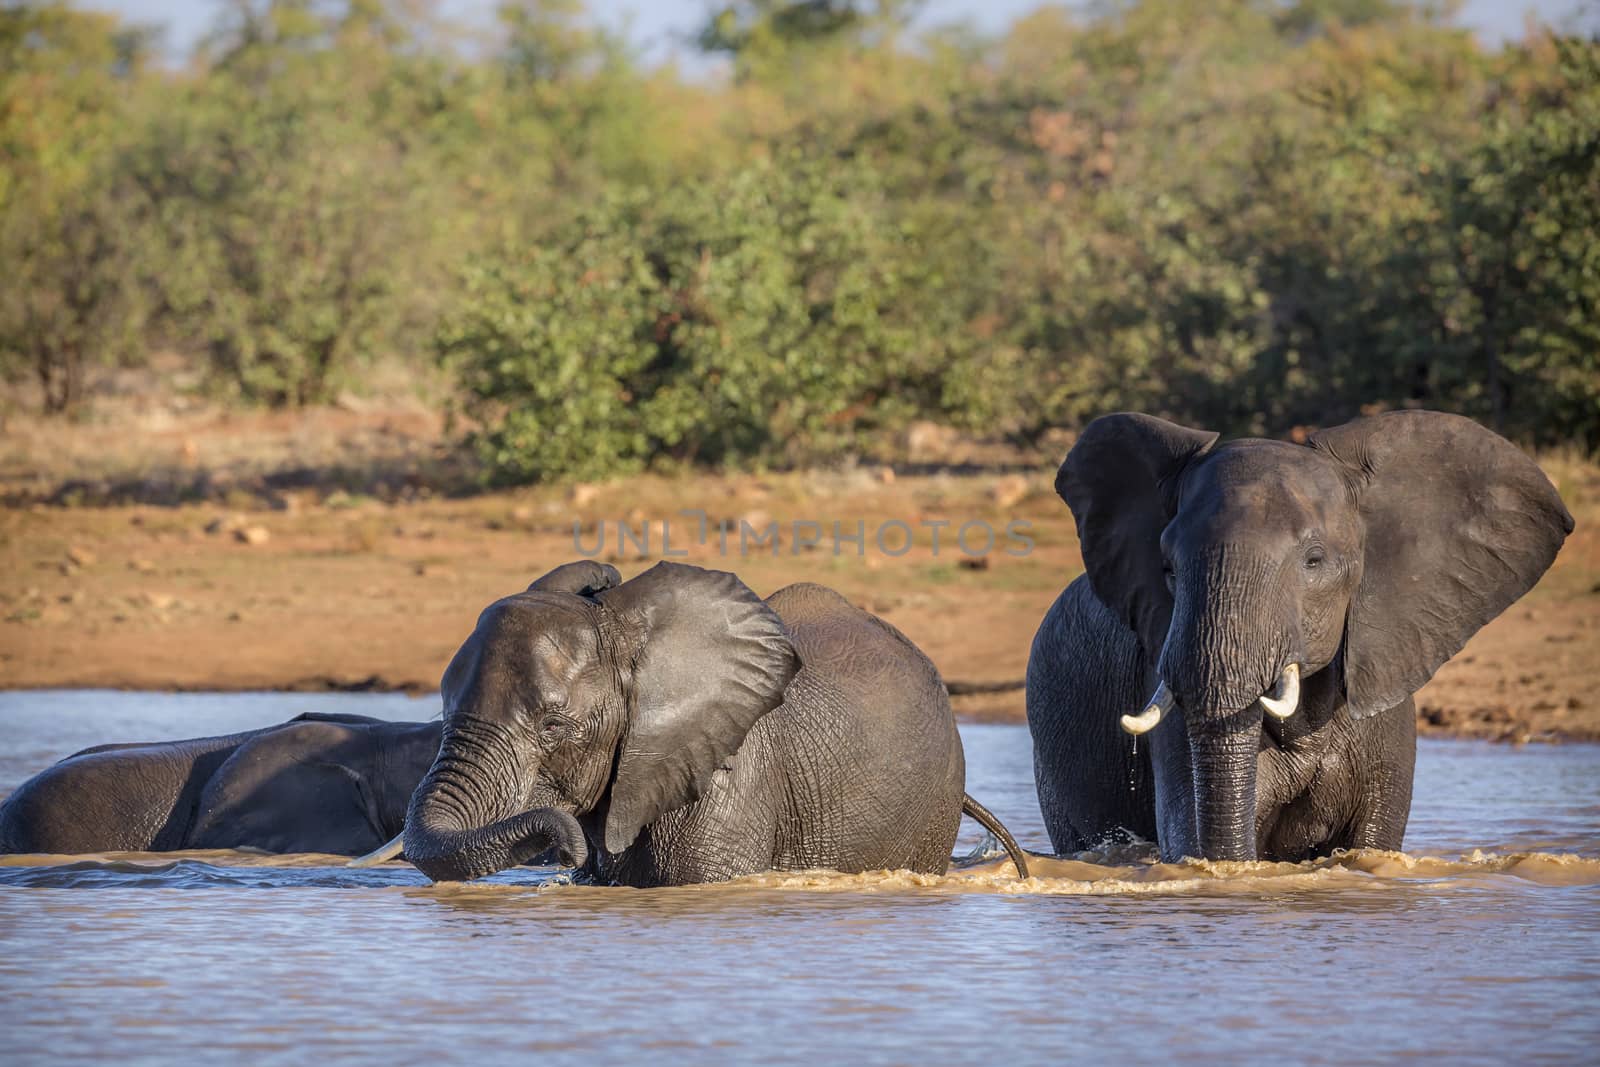 Two African bush elephants playing in water in Kruger National park, South Africa ; Specie Loxodonta africana family of Elephantidae